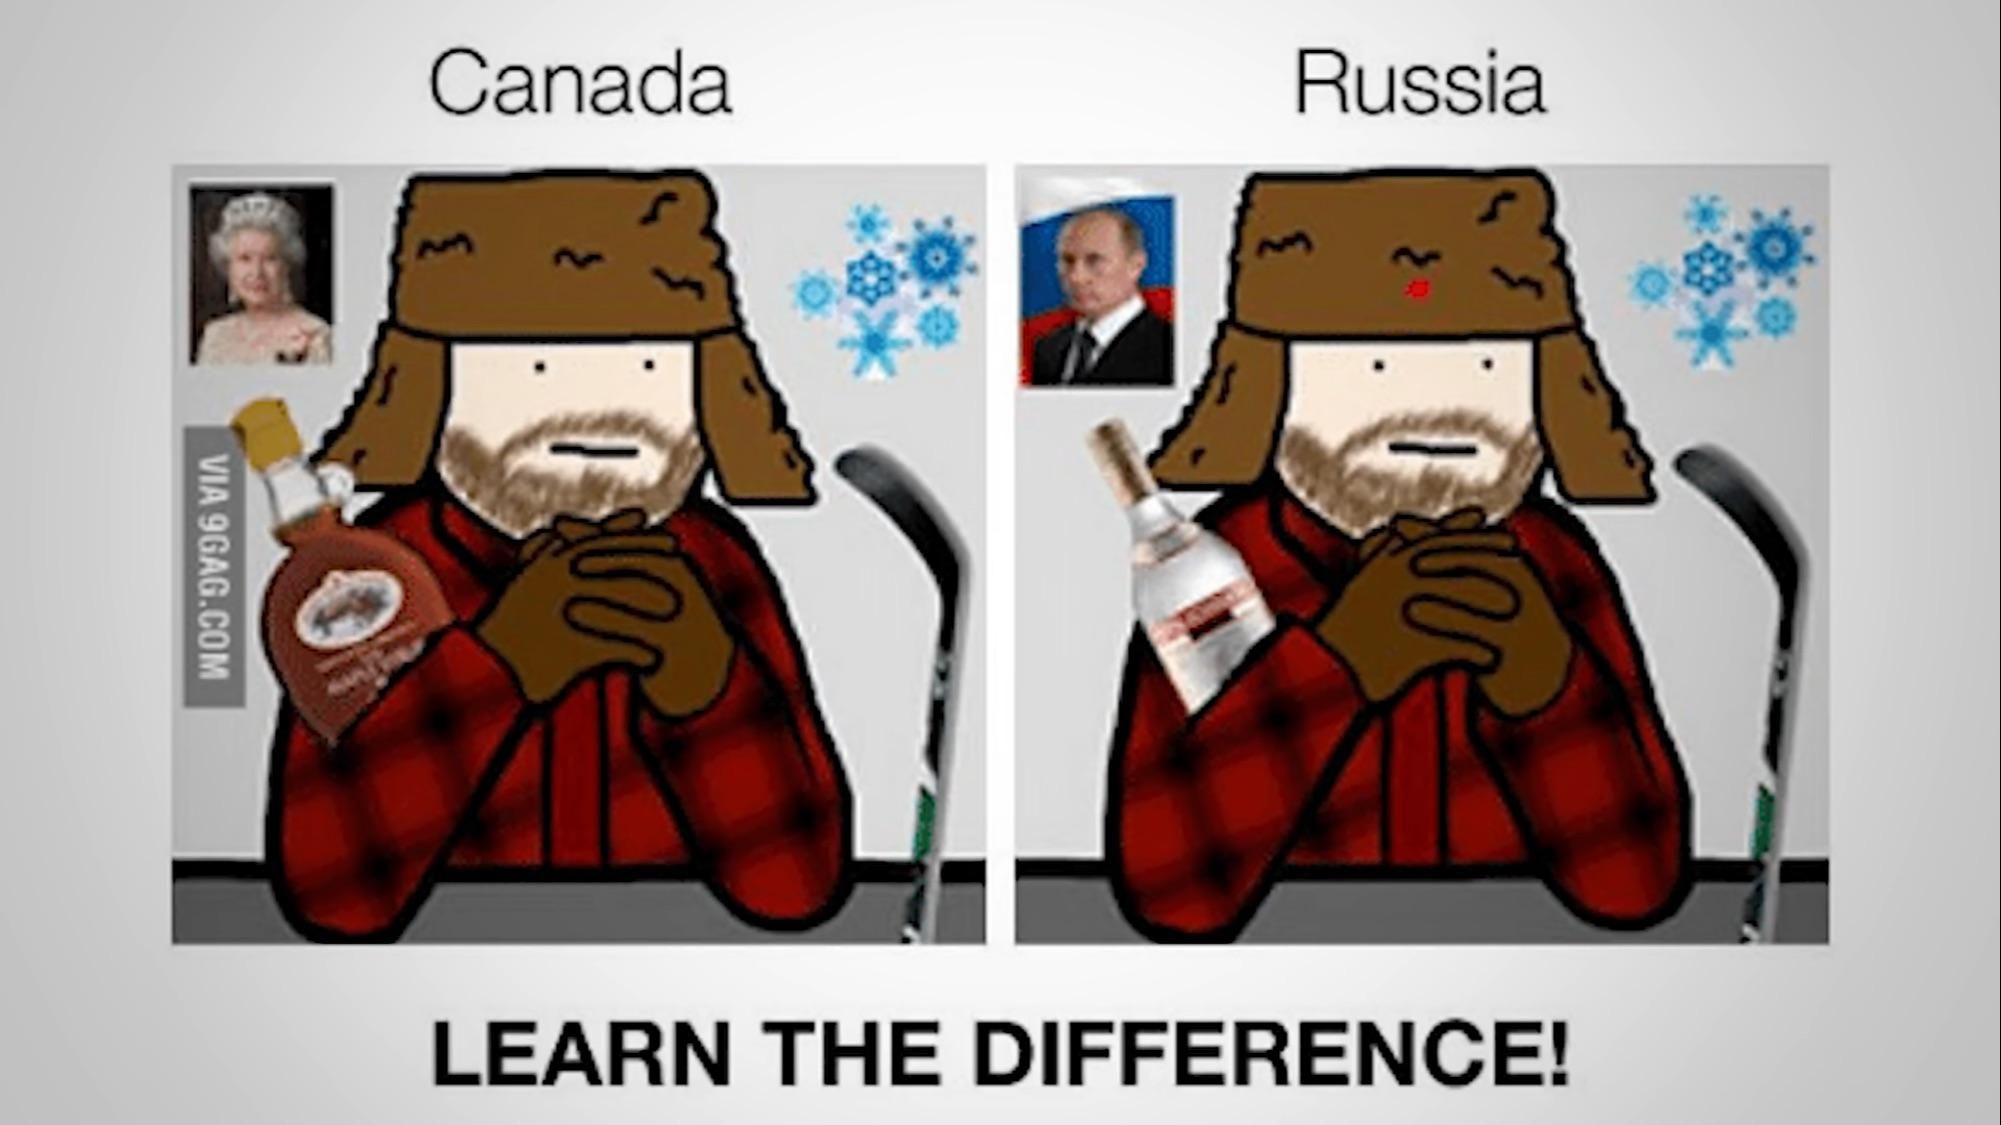 Learn the difference people!